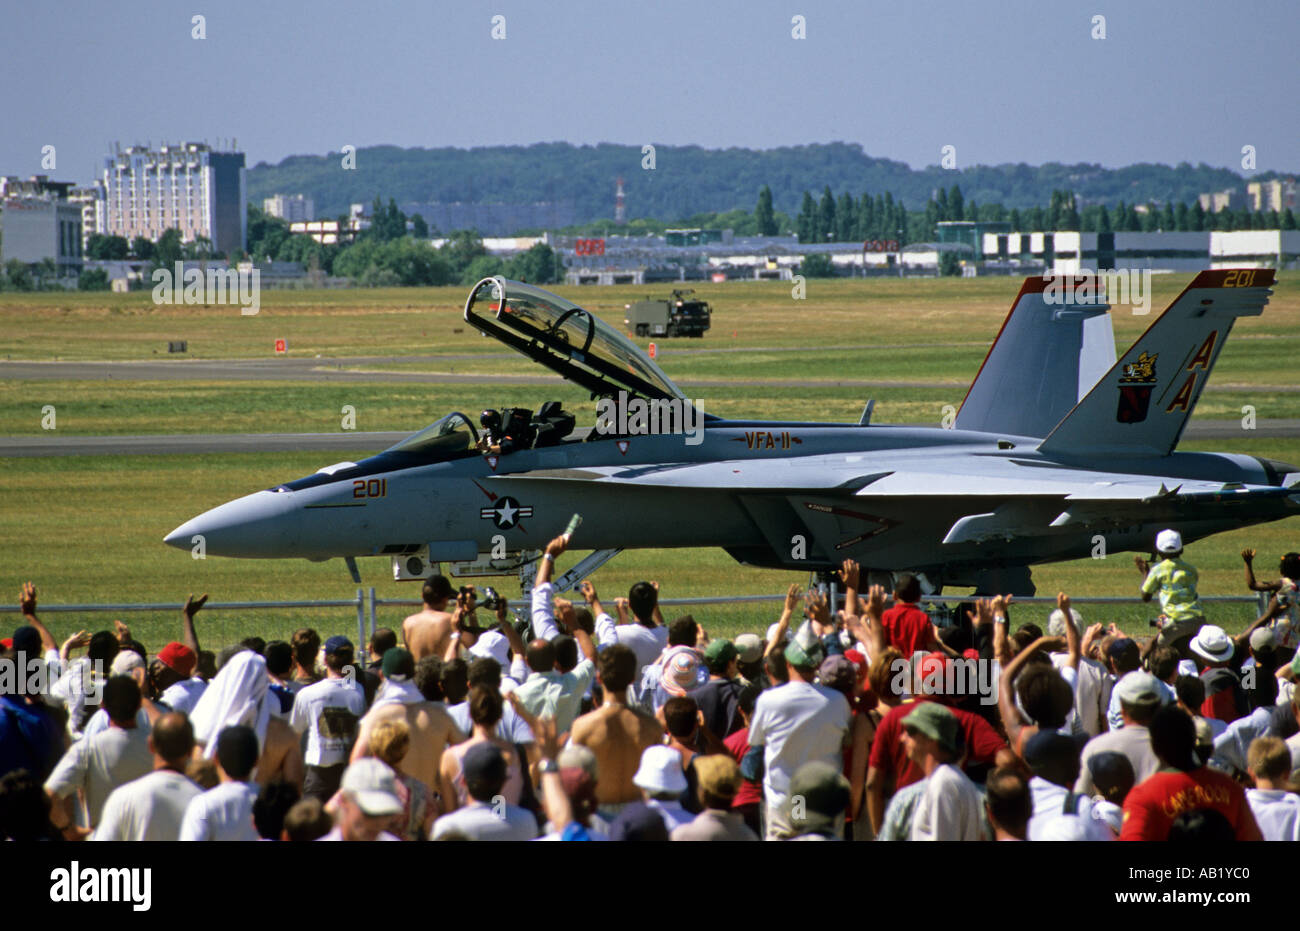 Europe Paris France Le Bourget F A 18F F18 Super Hornet and crowd Stock Photo